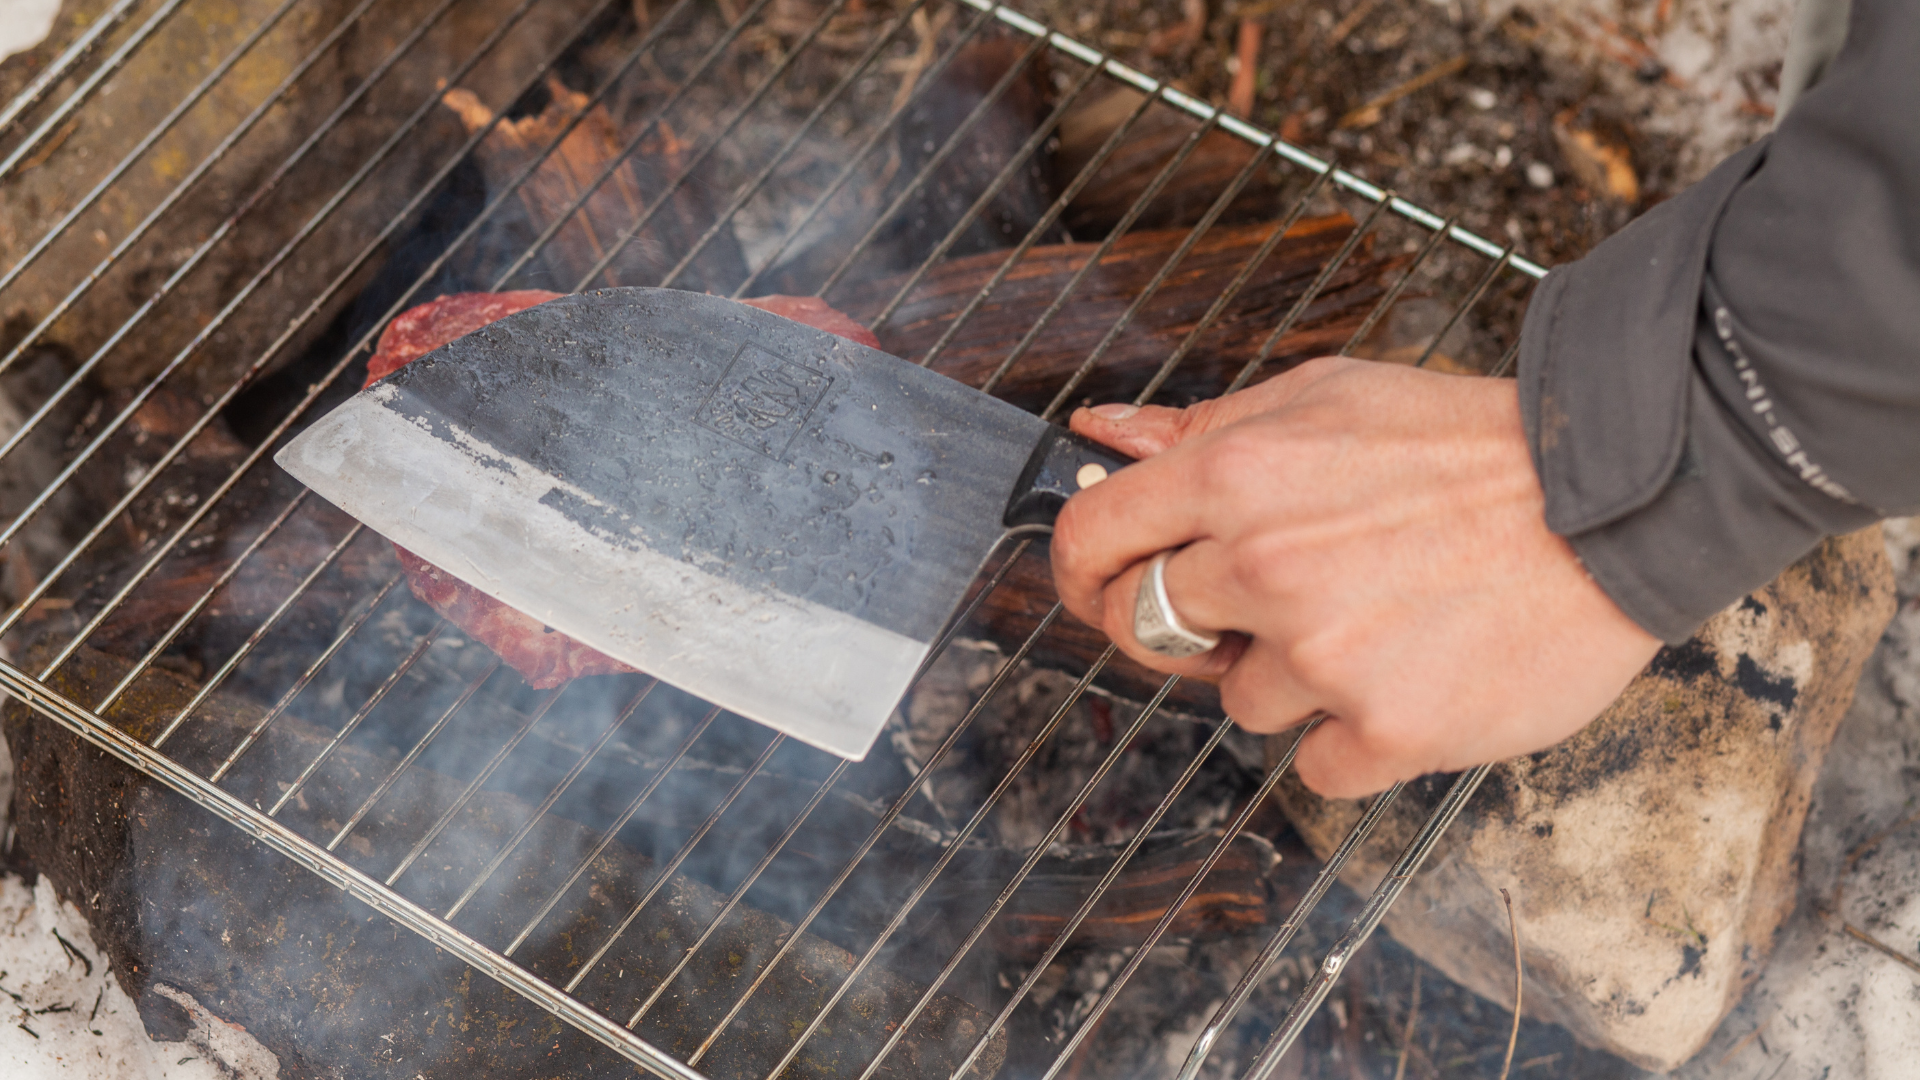 Knife Maintenance After a Summer of Cooking and Grilling: Tips and Tricks